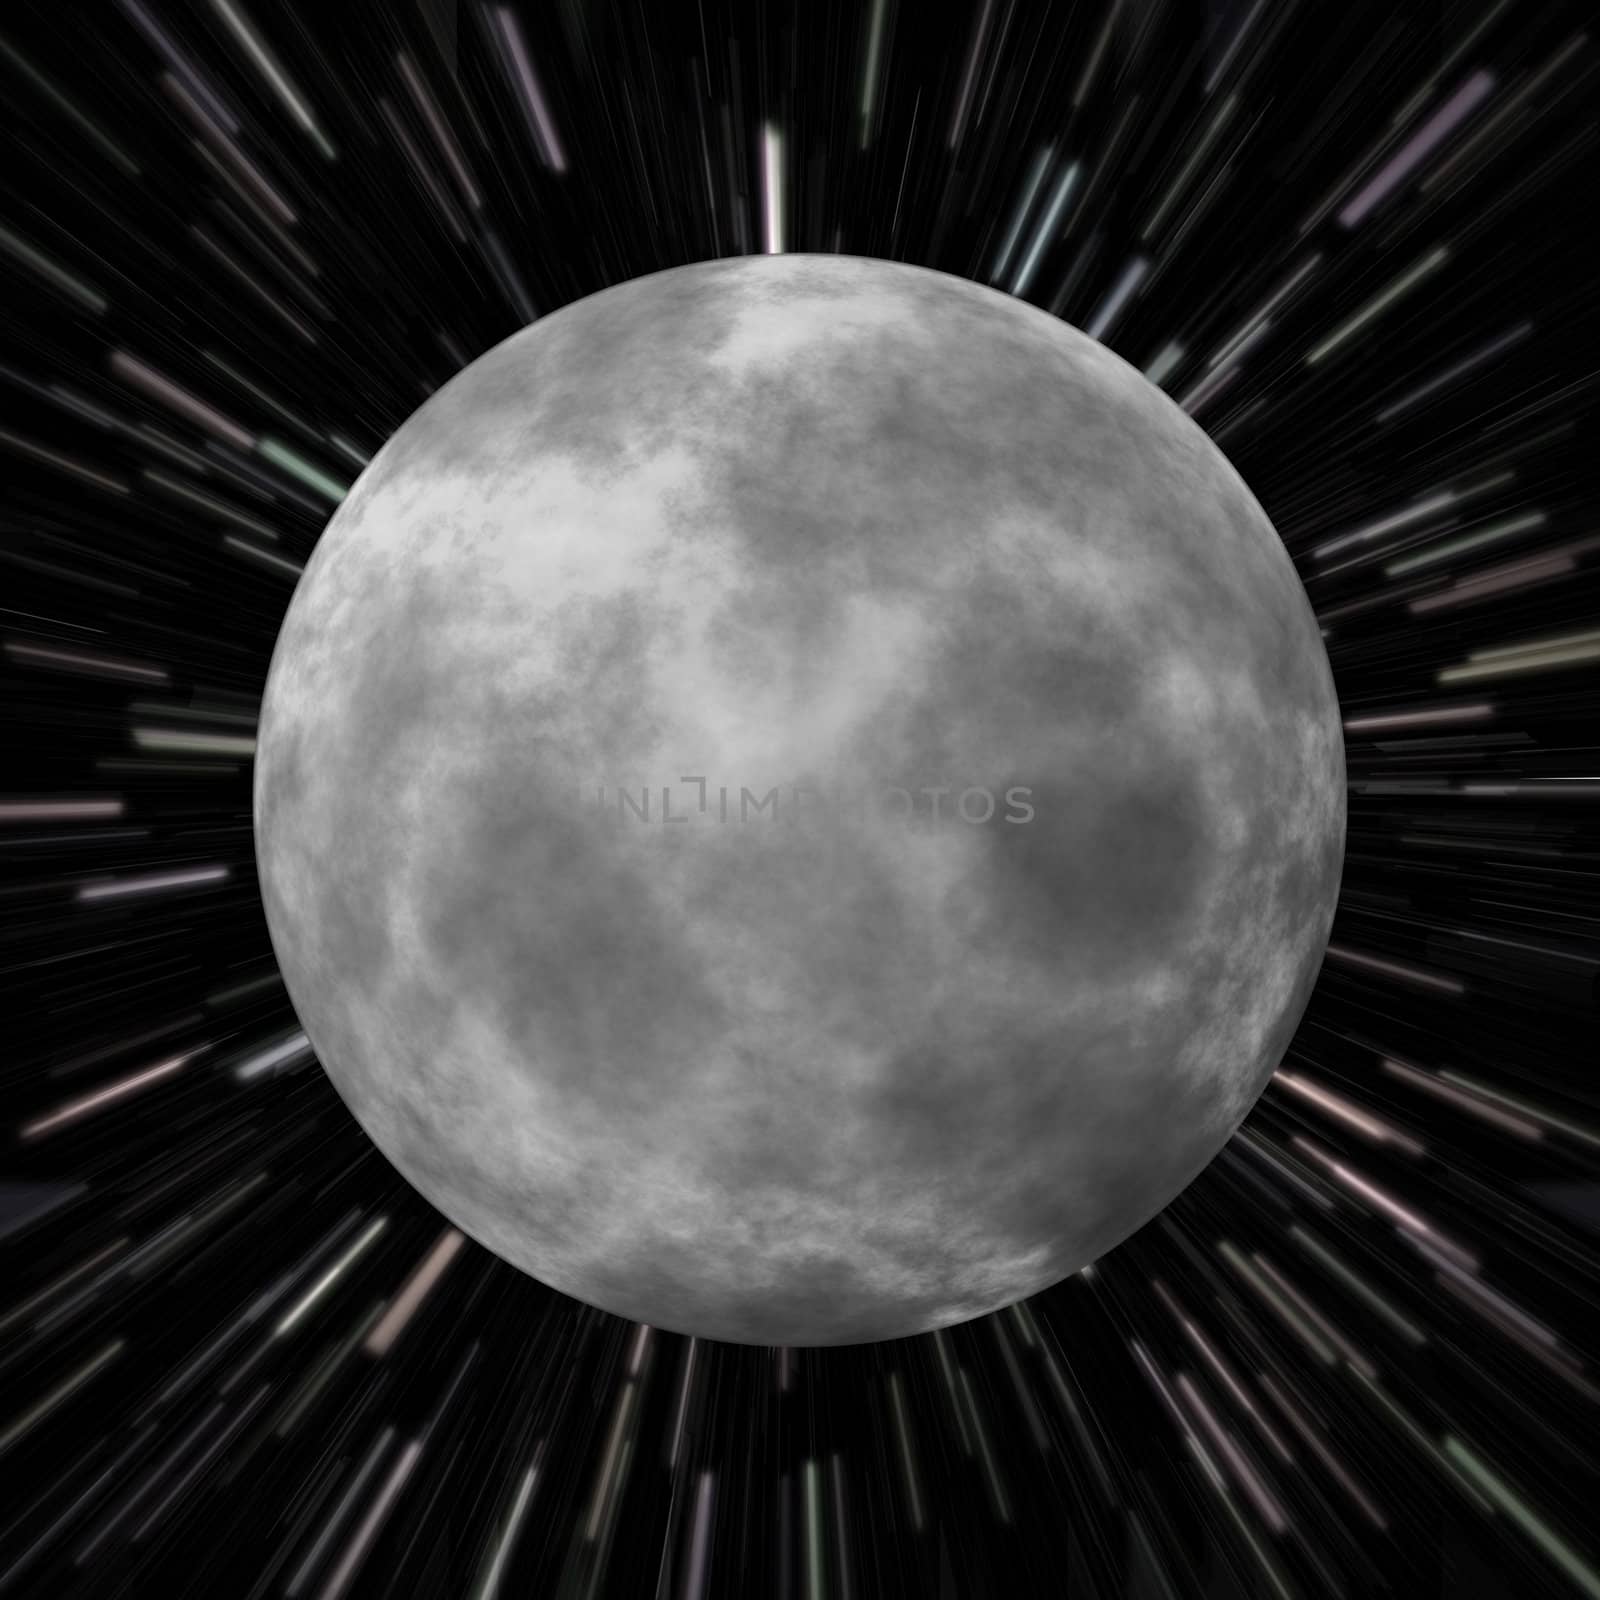 Illustration of the moon over a star field background with high speed effects to show movement.